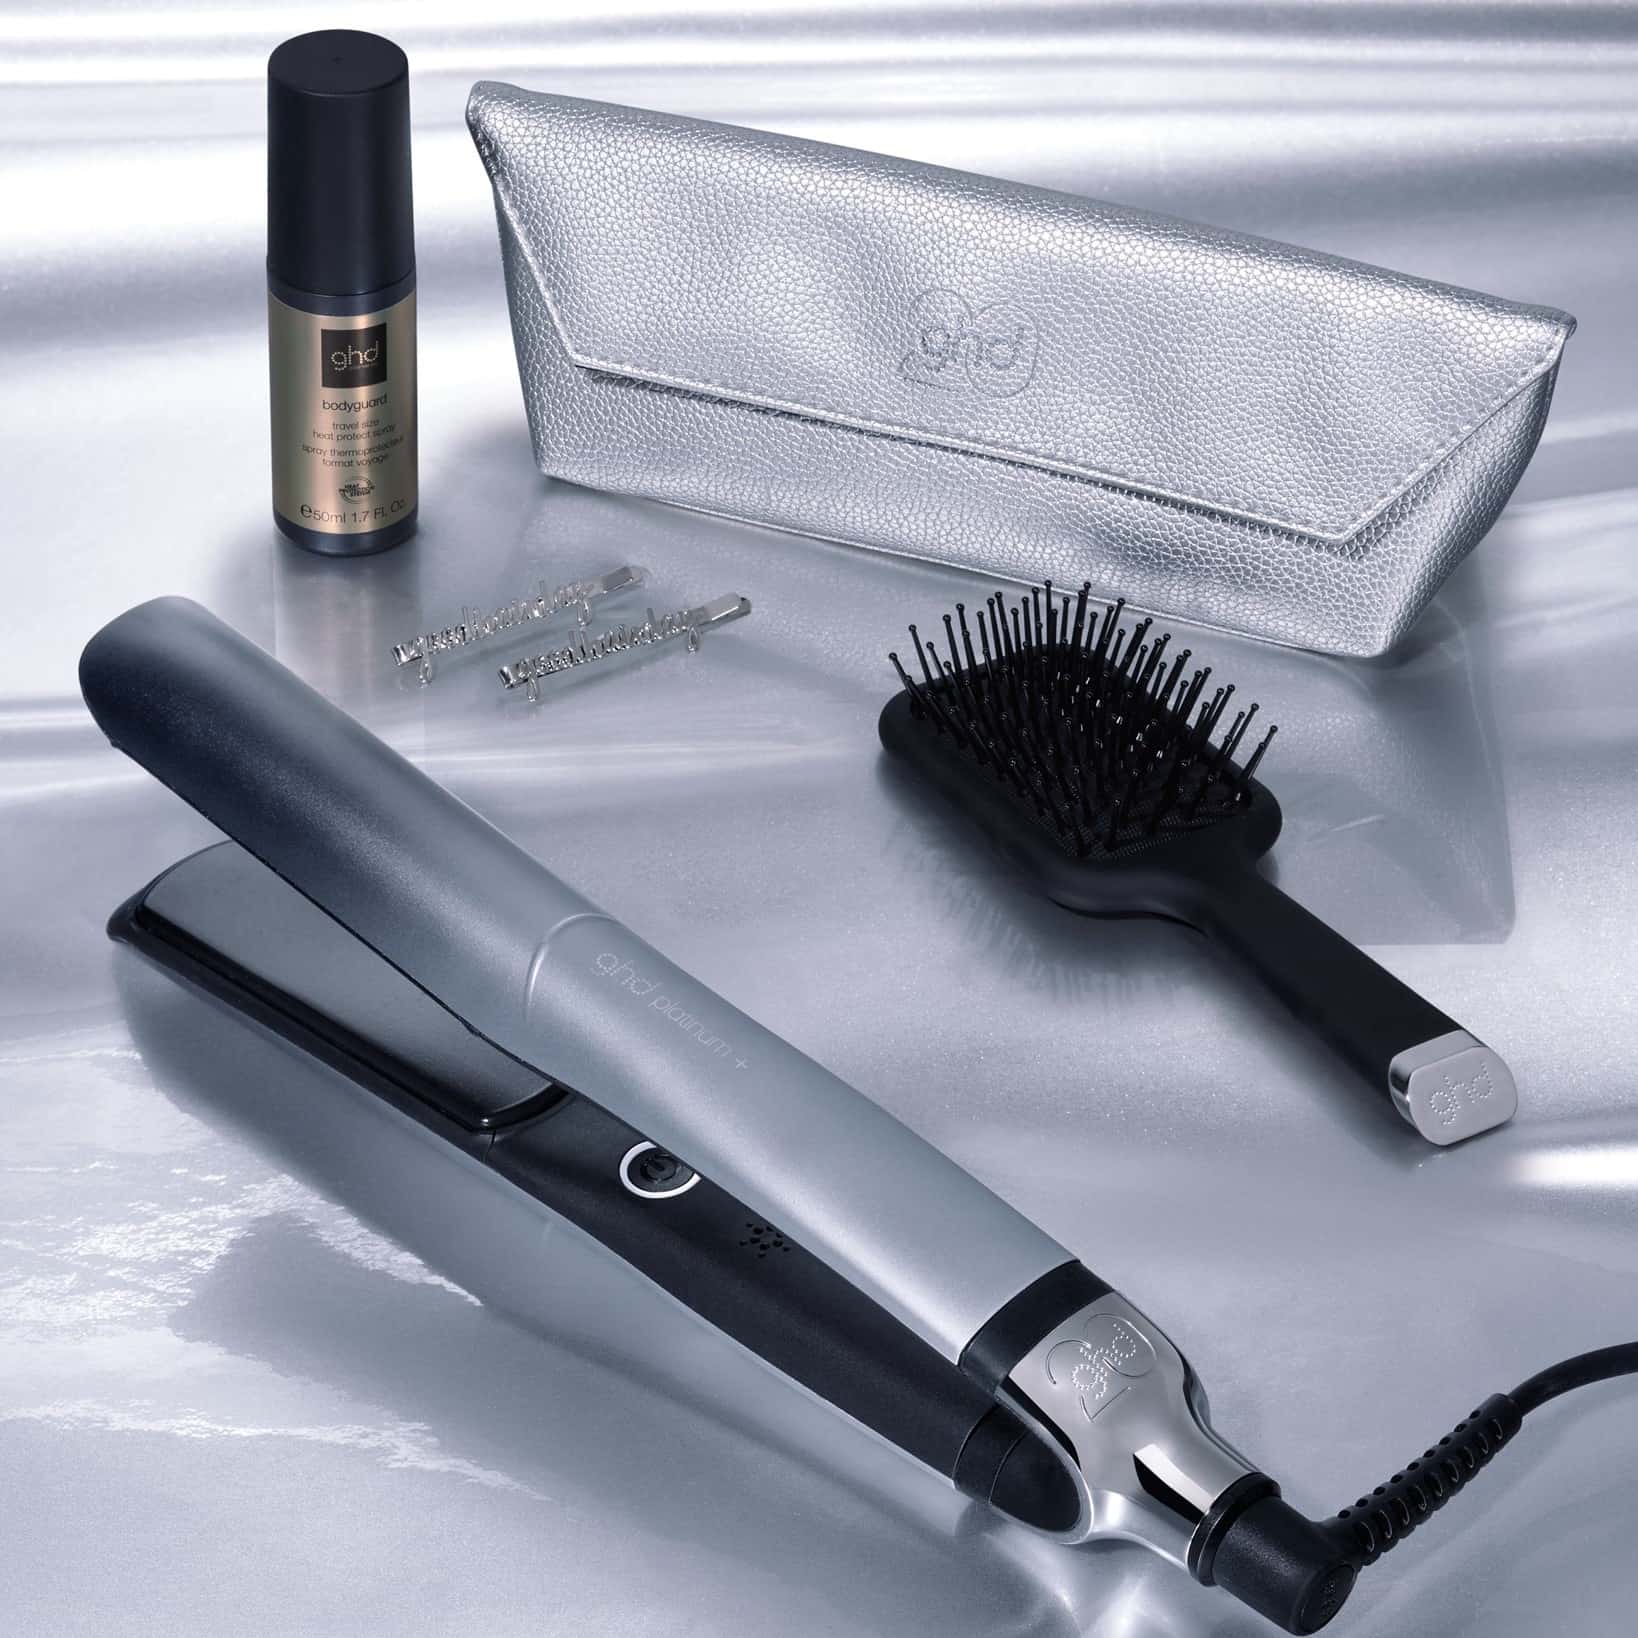 GHD Flat Iron Review - Must Read This Before Buying